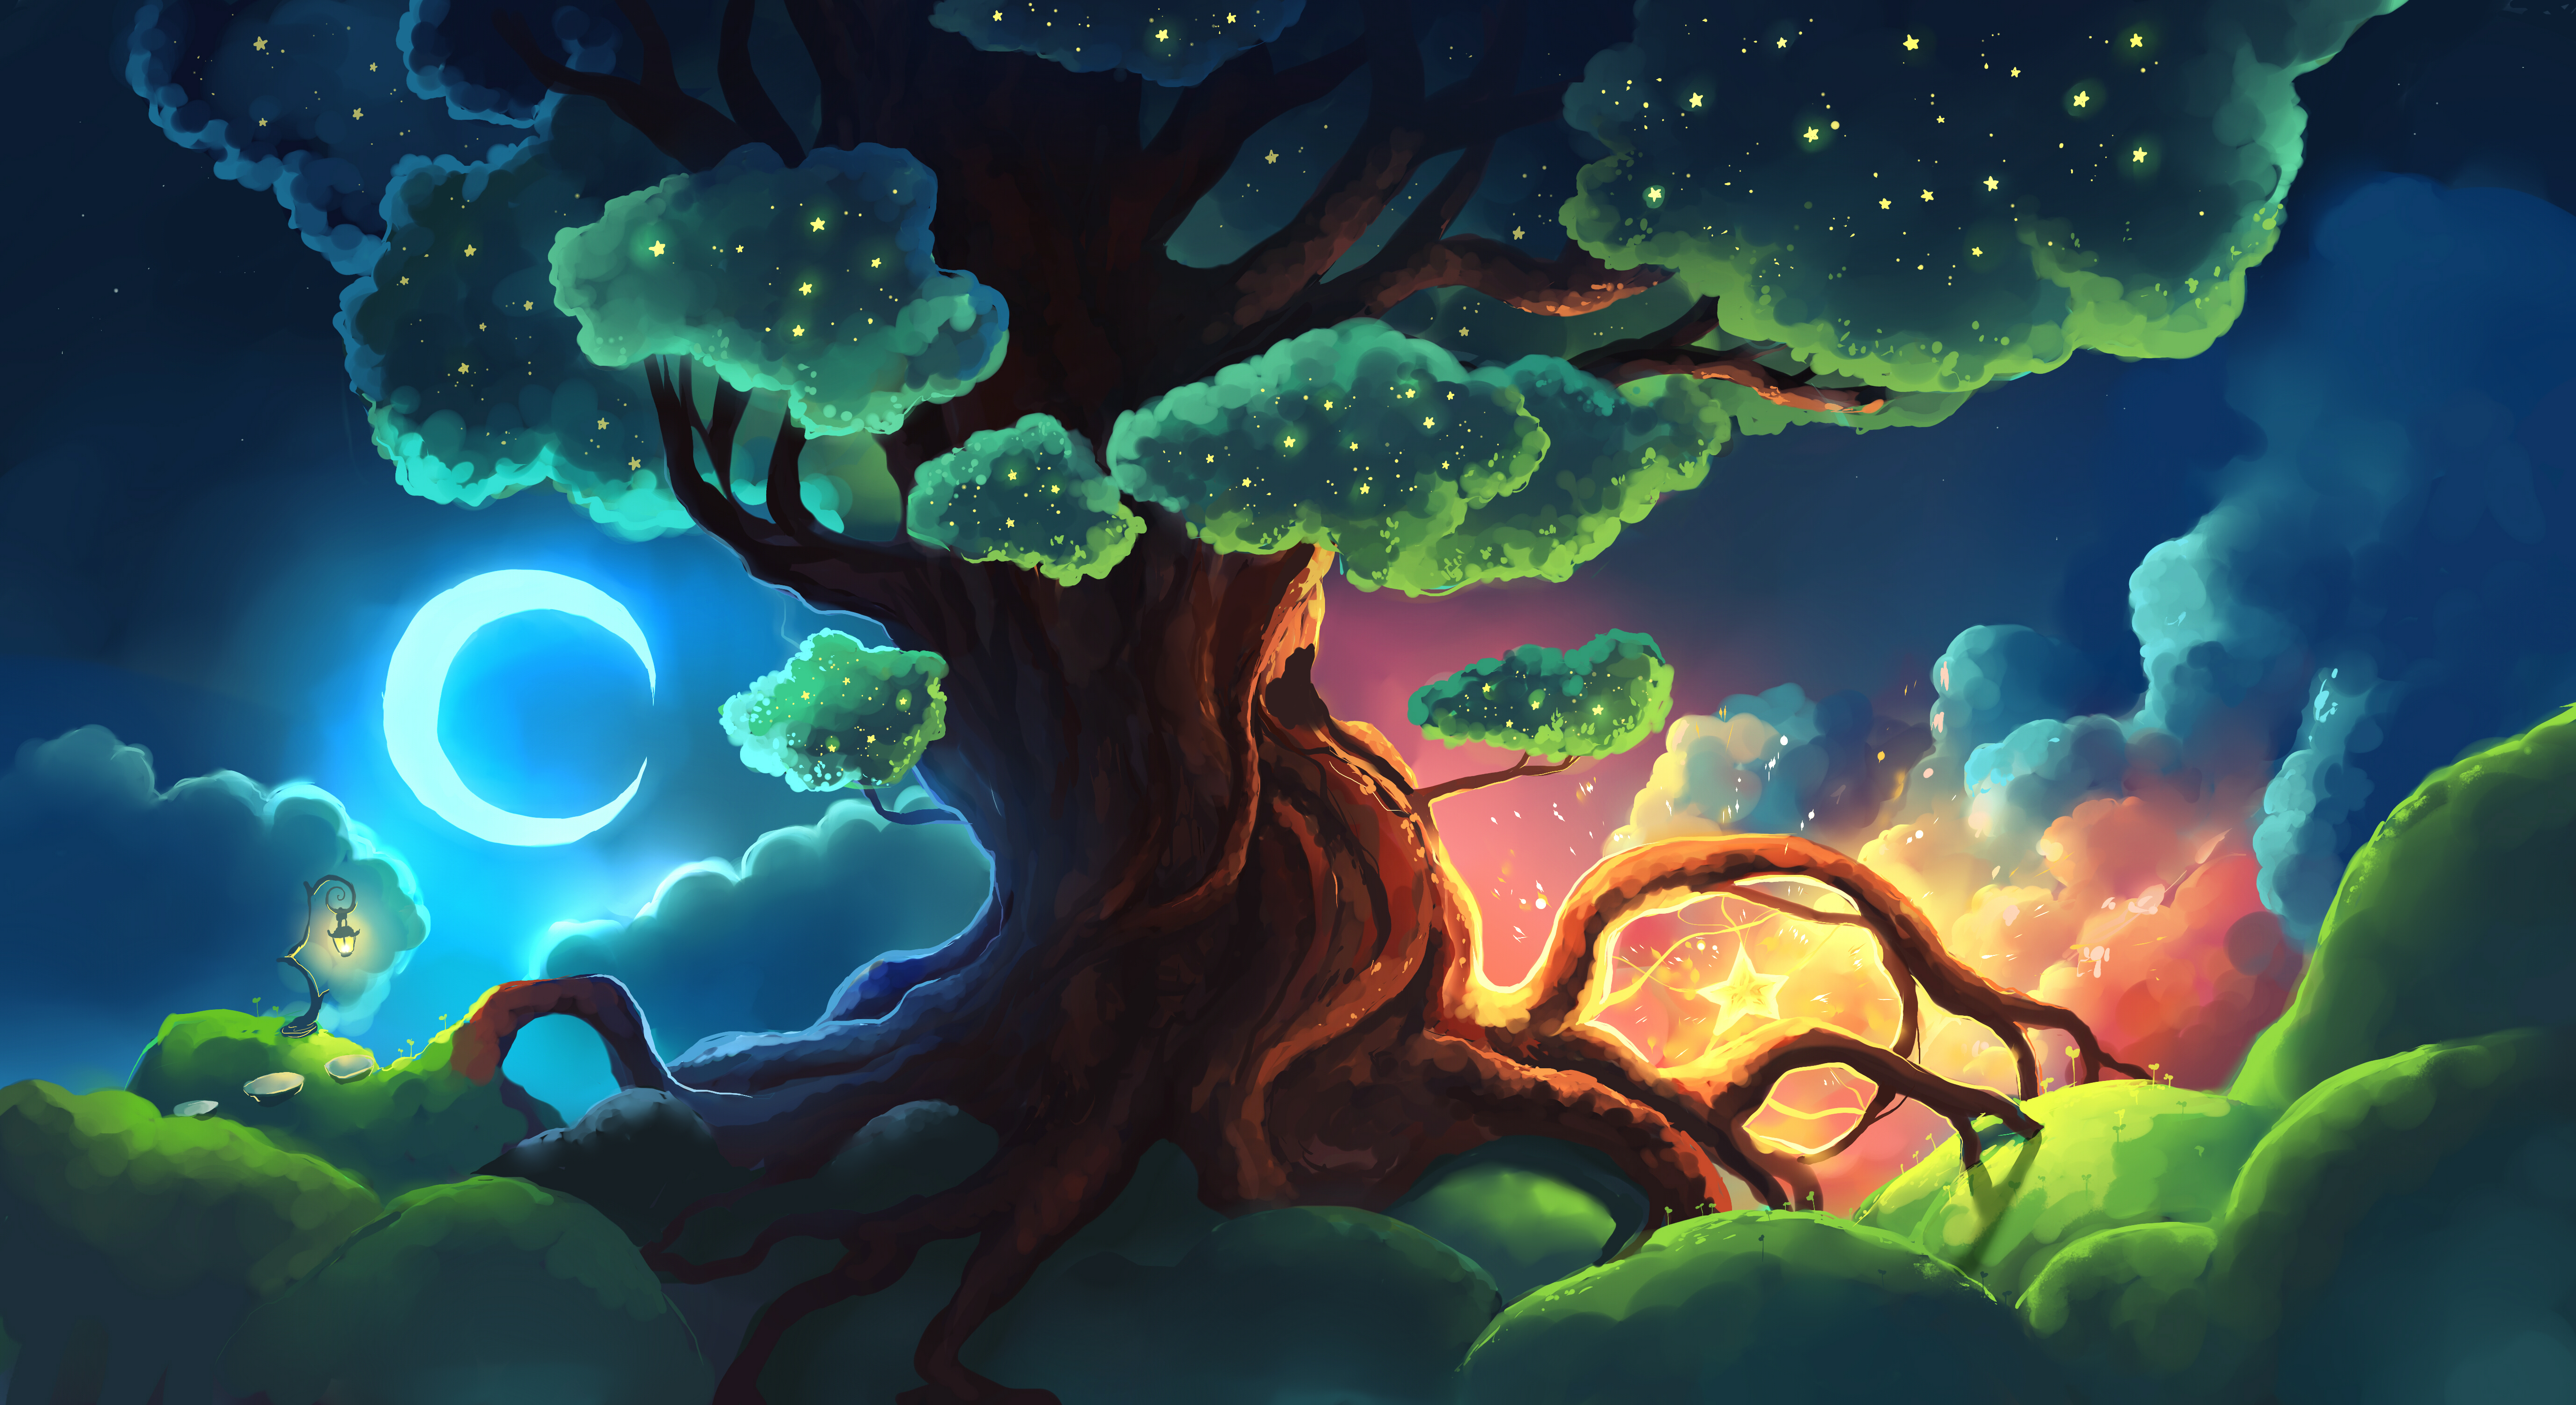 crescent, roots, artistic, tree, cloud, moon, painting, stars